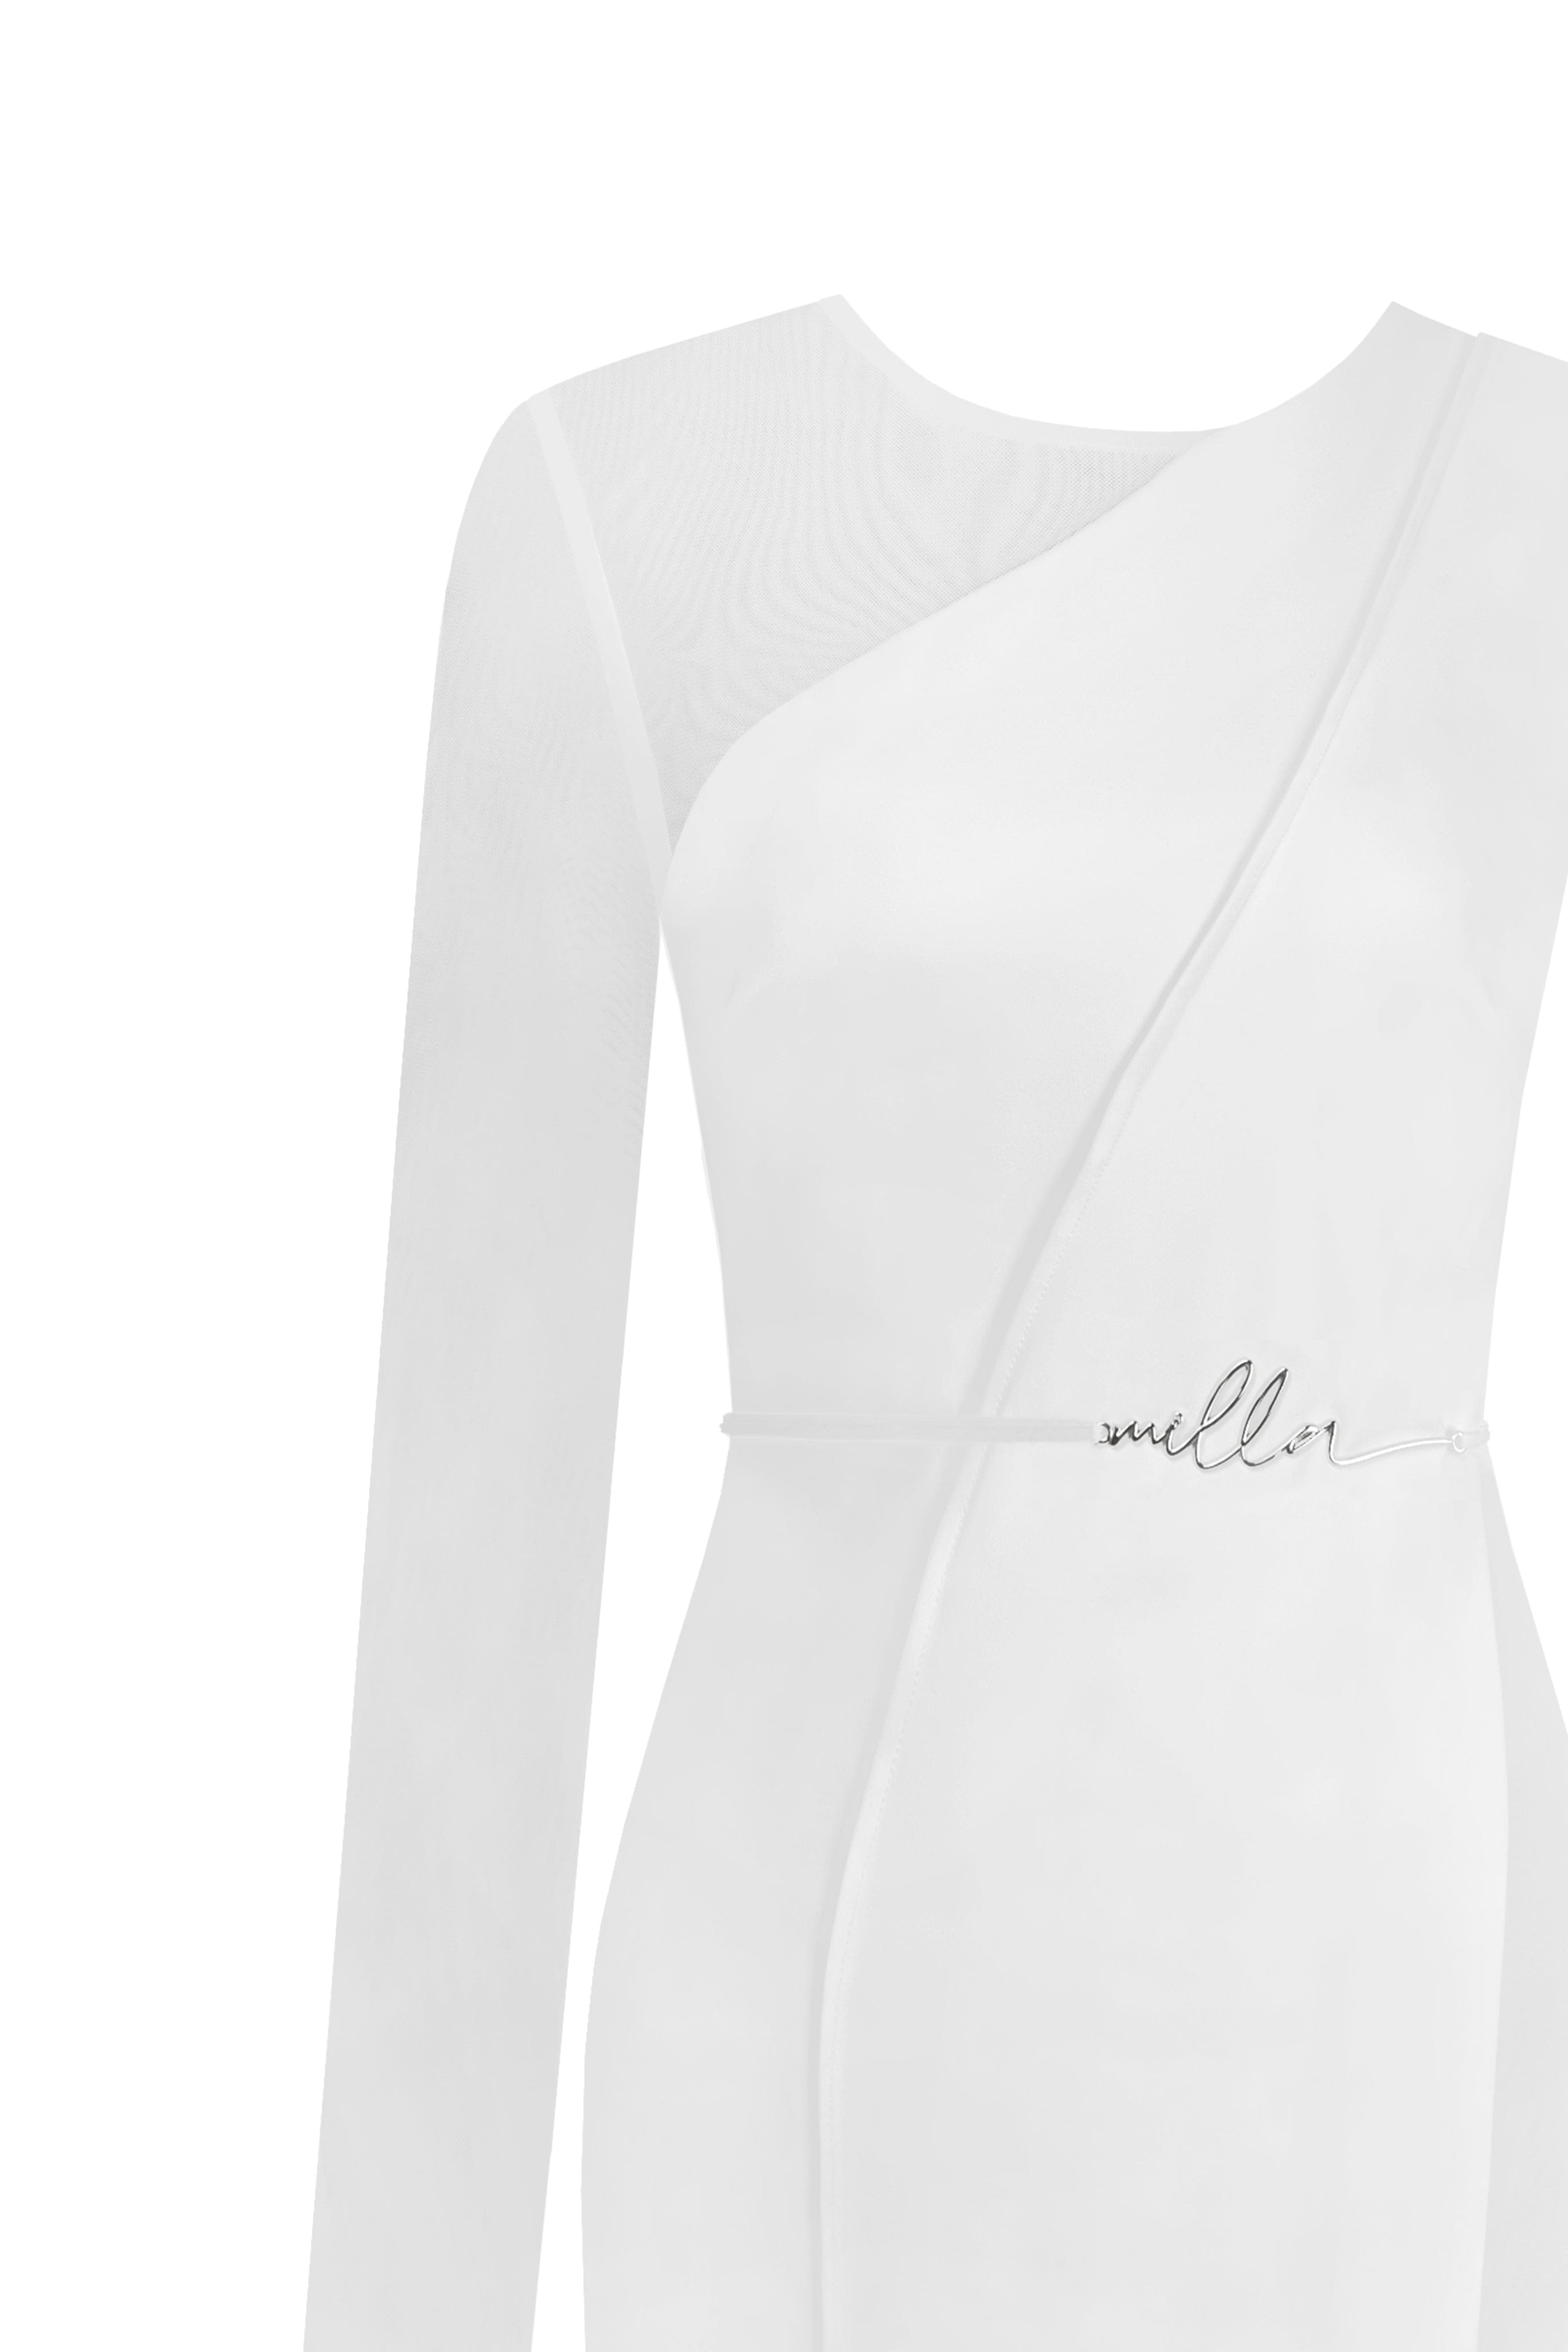 Stunning one-shoulder mini dress with sheer inserts in white, Xo Xo